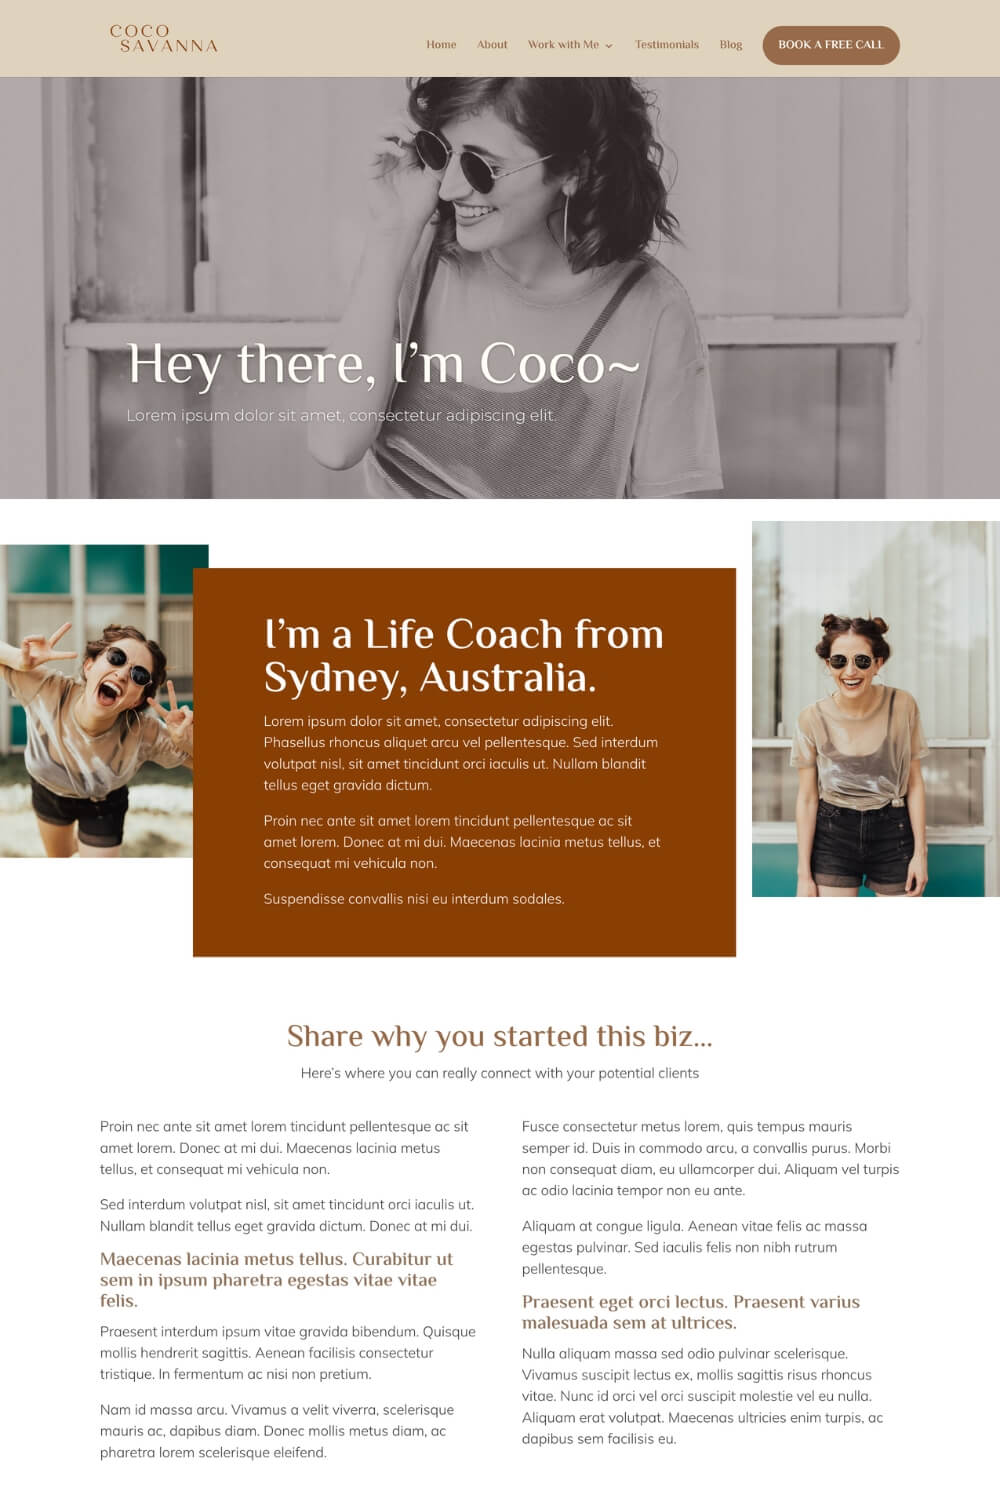 WordPress Website Templates for Life Coaches Business Mentors Done for You Coco